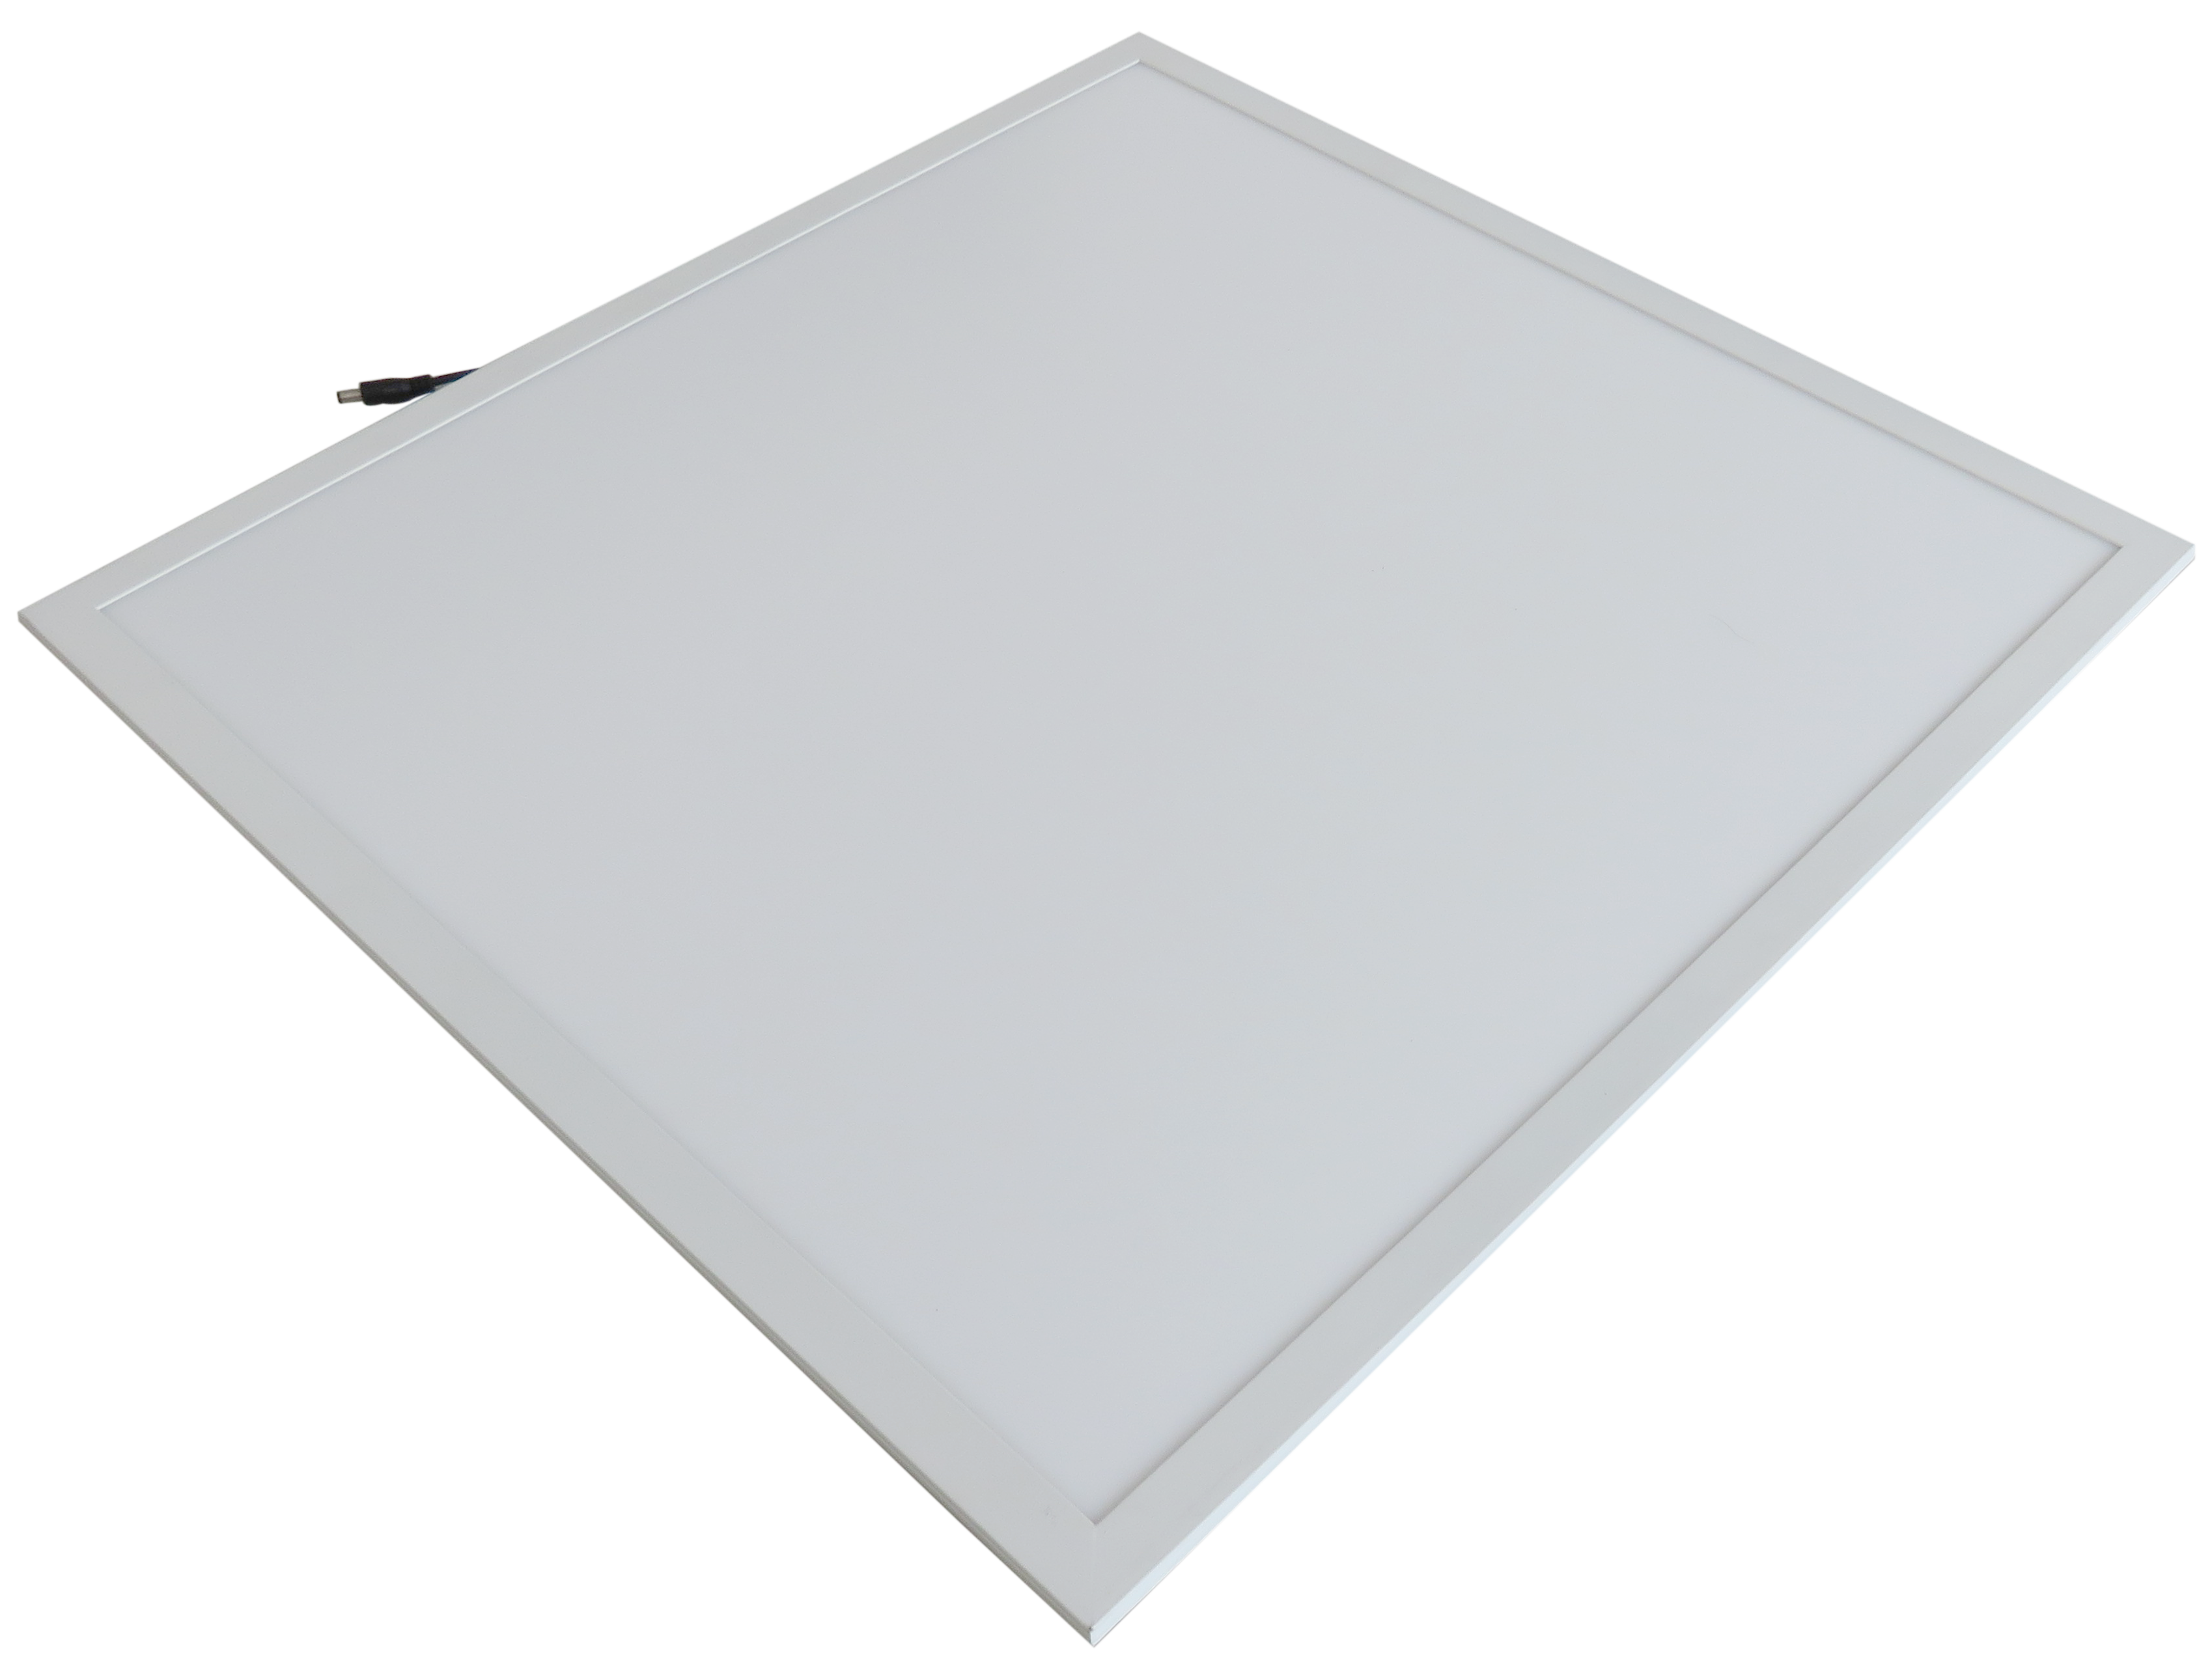 Corp SLIM PANEL LED 40W 60x60 5200lm NW 